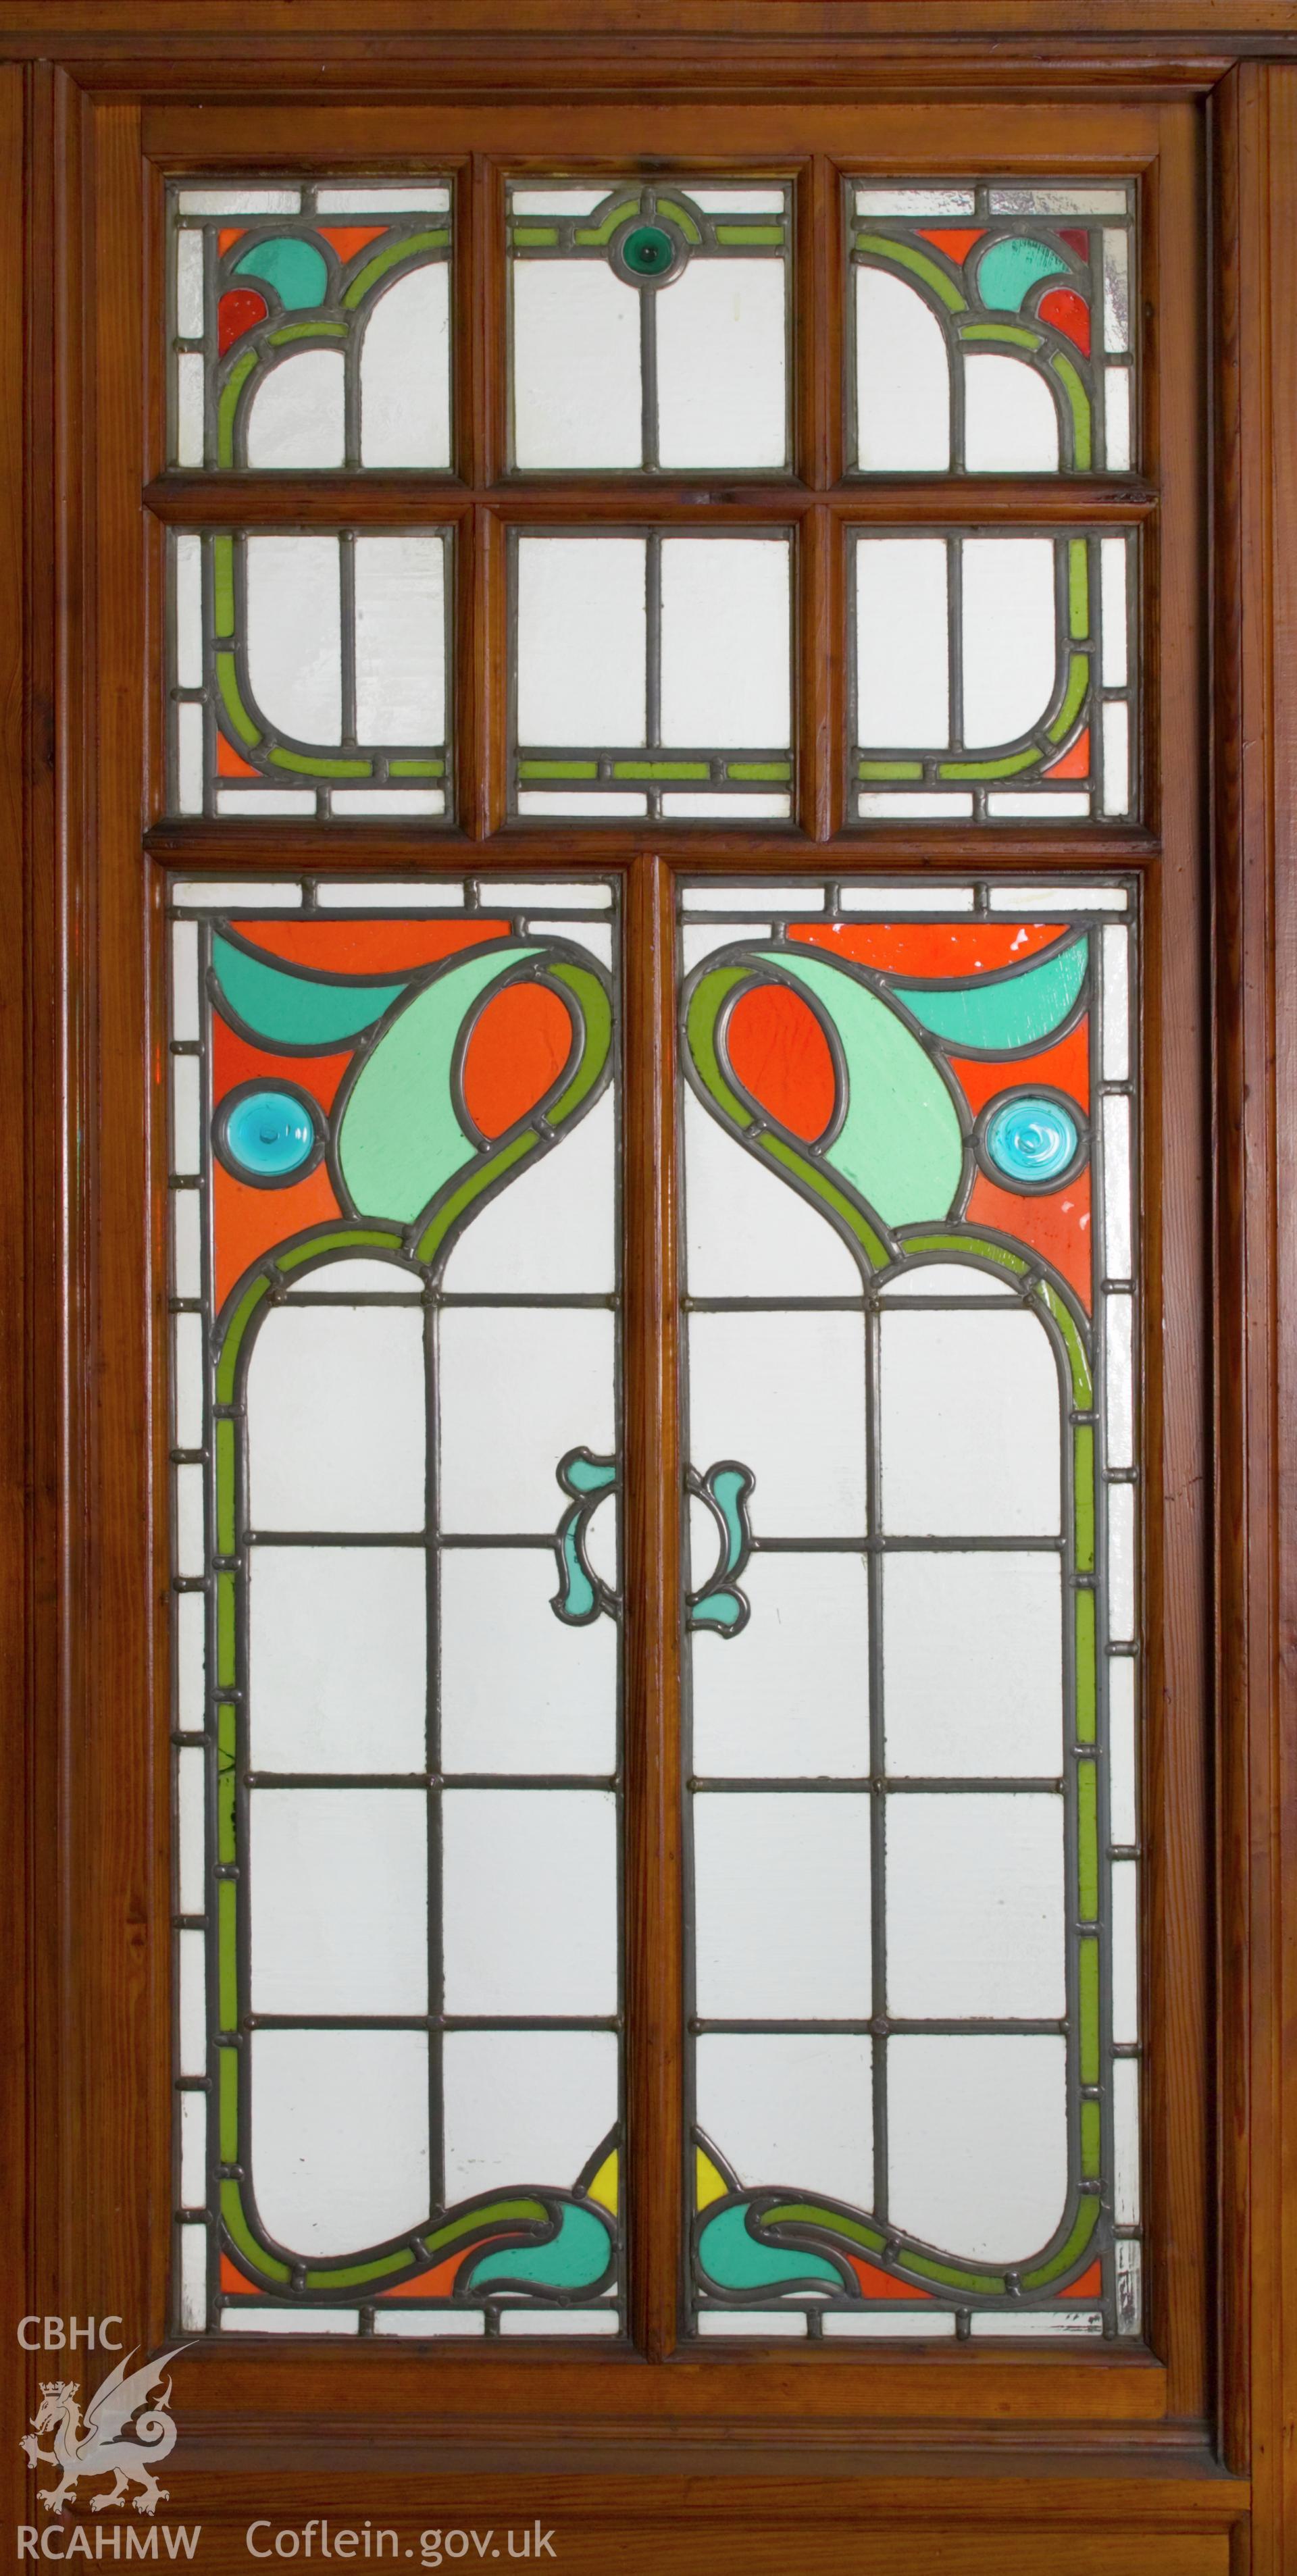 Section of rear stained glass screen.